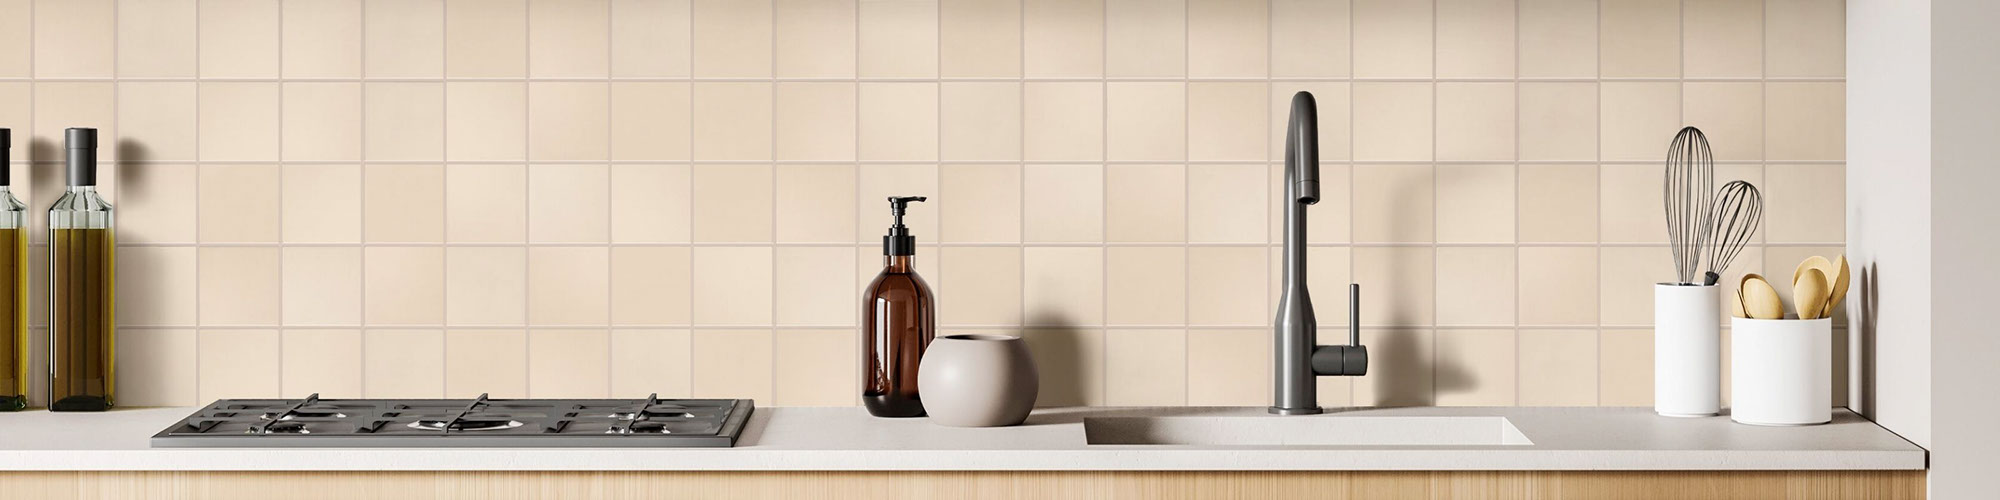 Closeup of kitchen backsplash of cream wall tile, undermount sink with gray faucet, brown glass soap dispenser, and white containers of kitchen utensils.